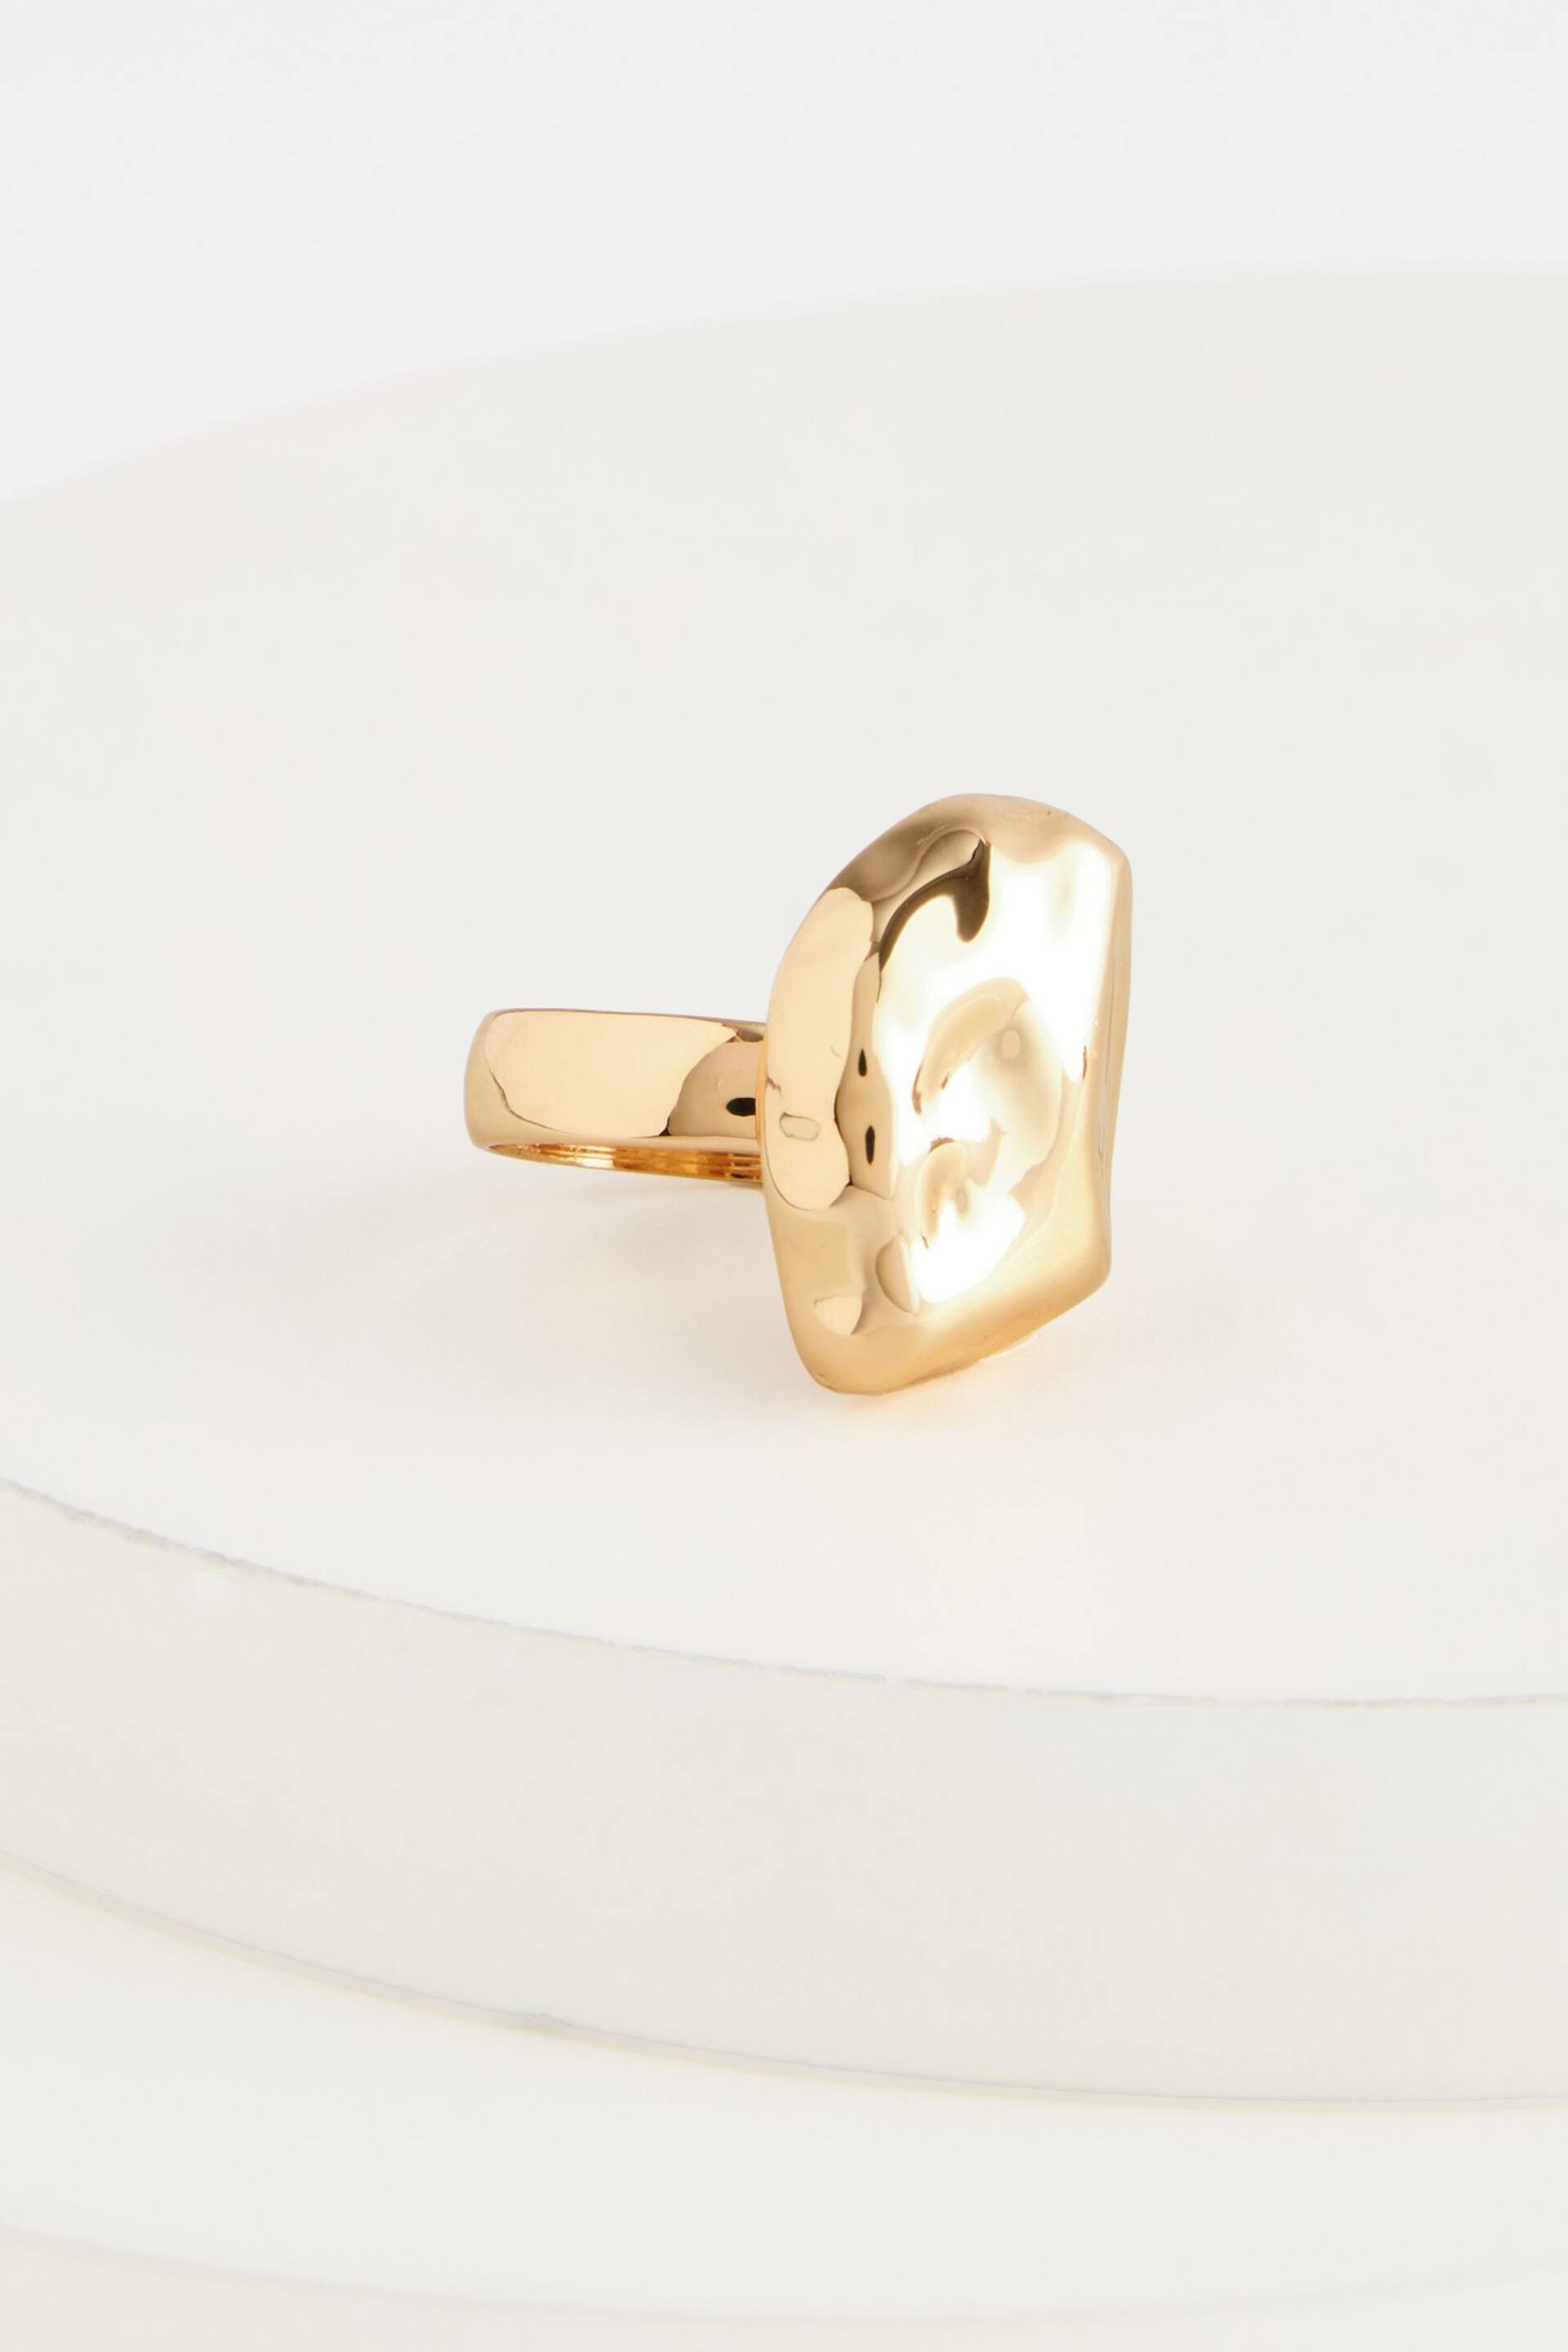 Gold Tone Pebble Statement Ring - Image 5 of 5